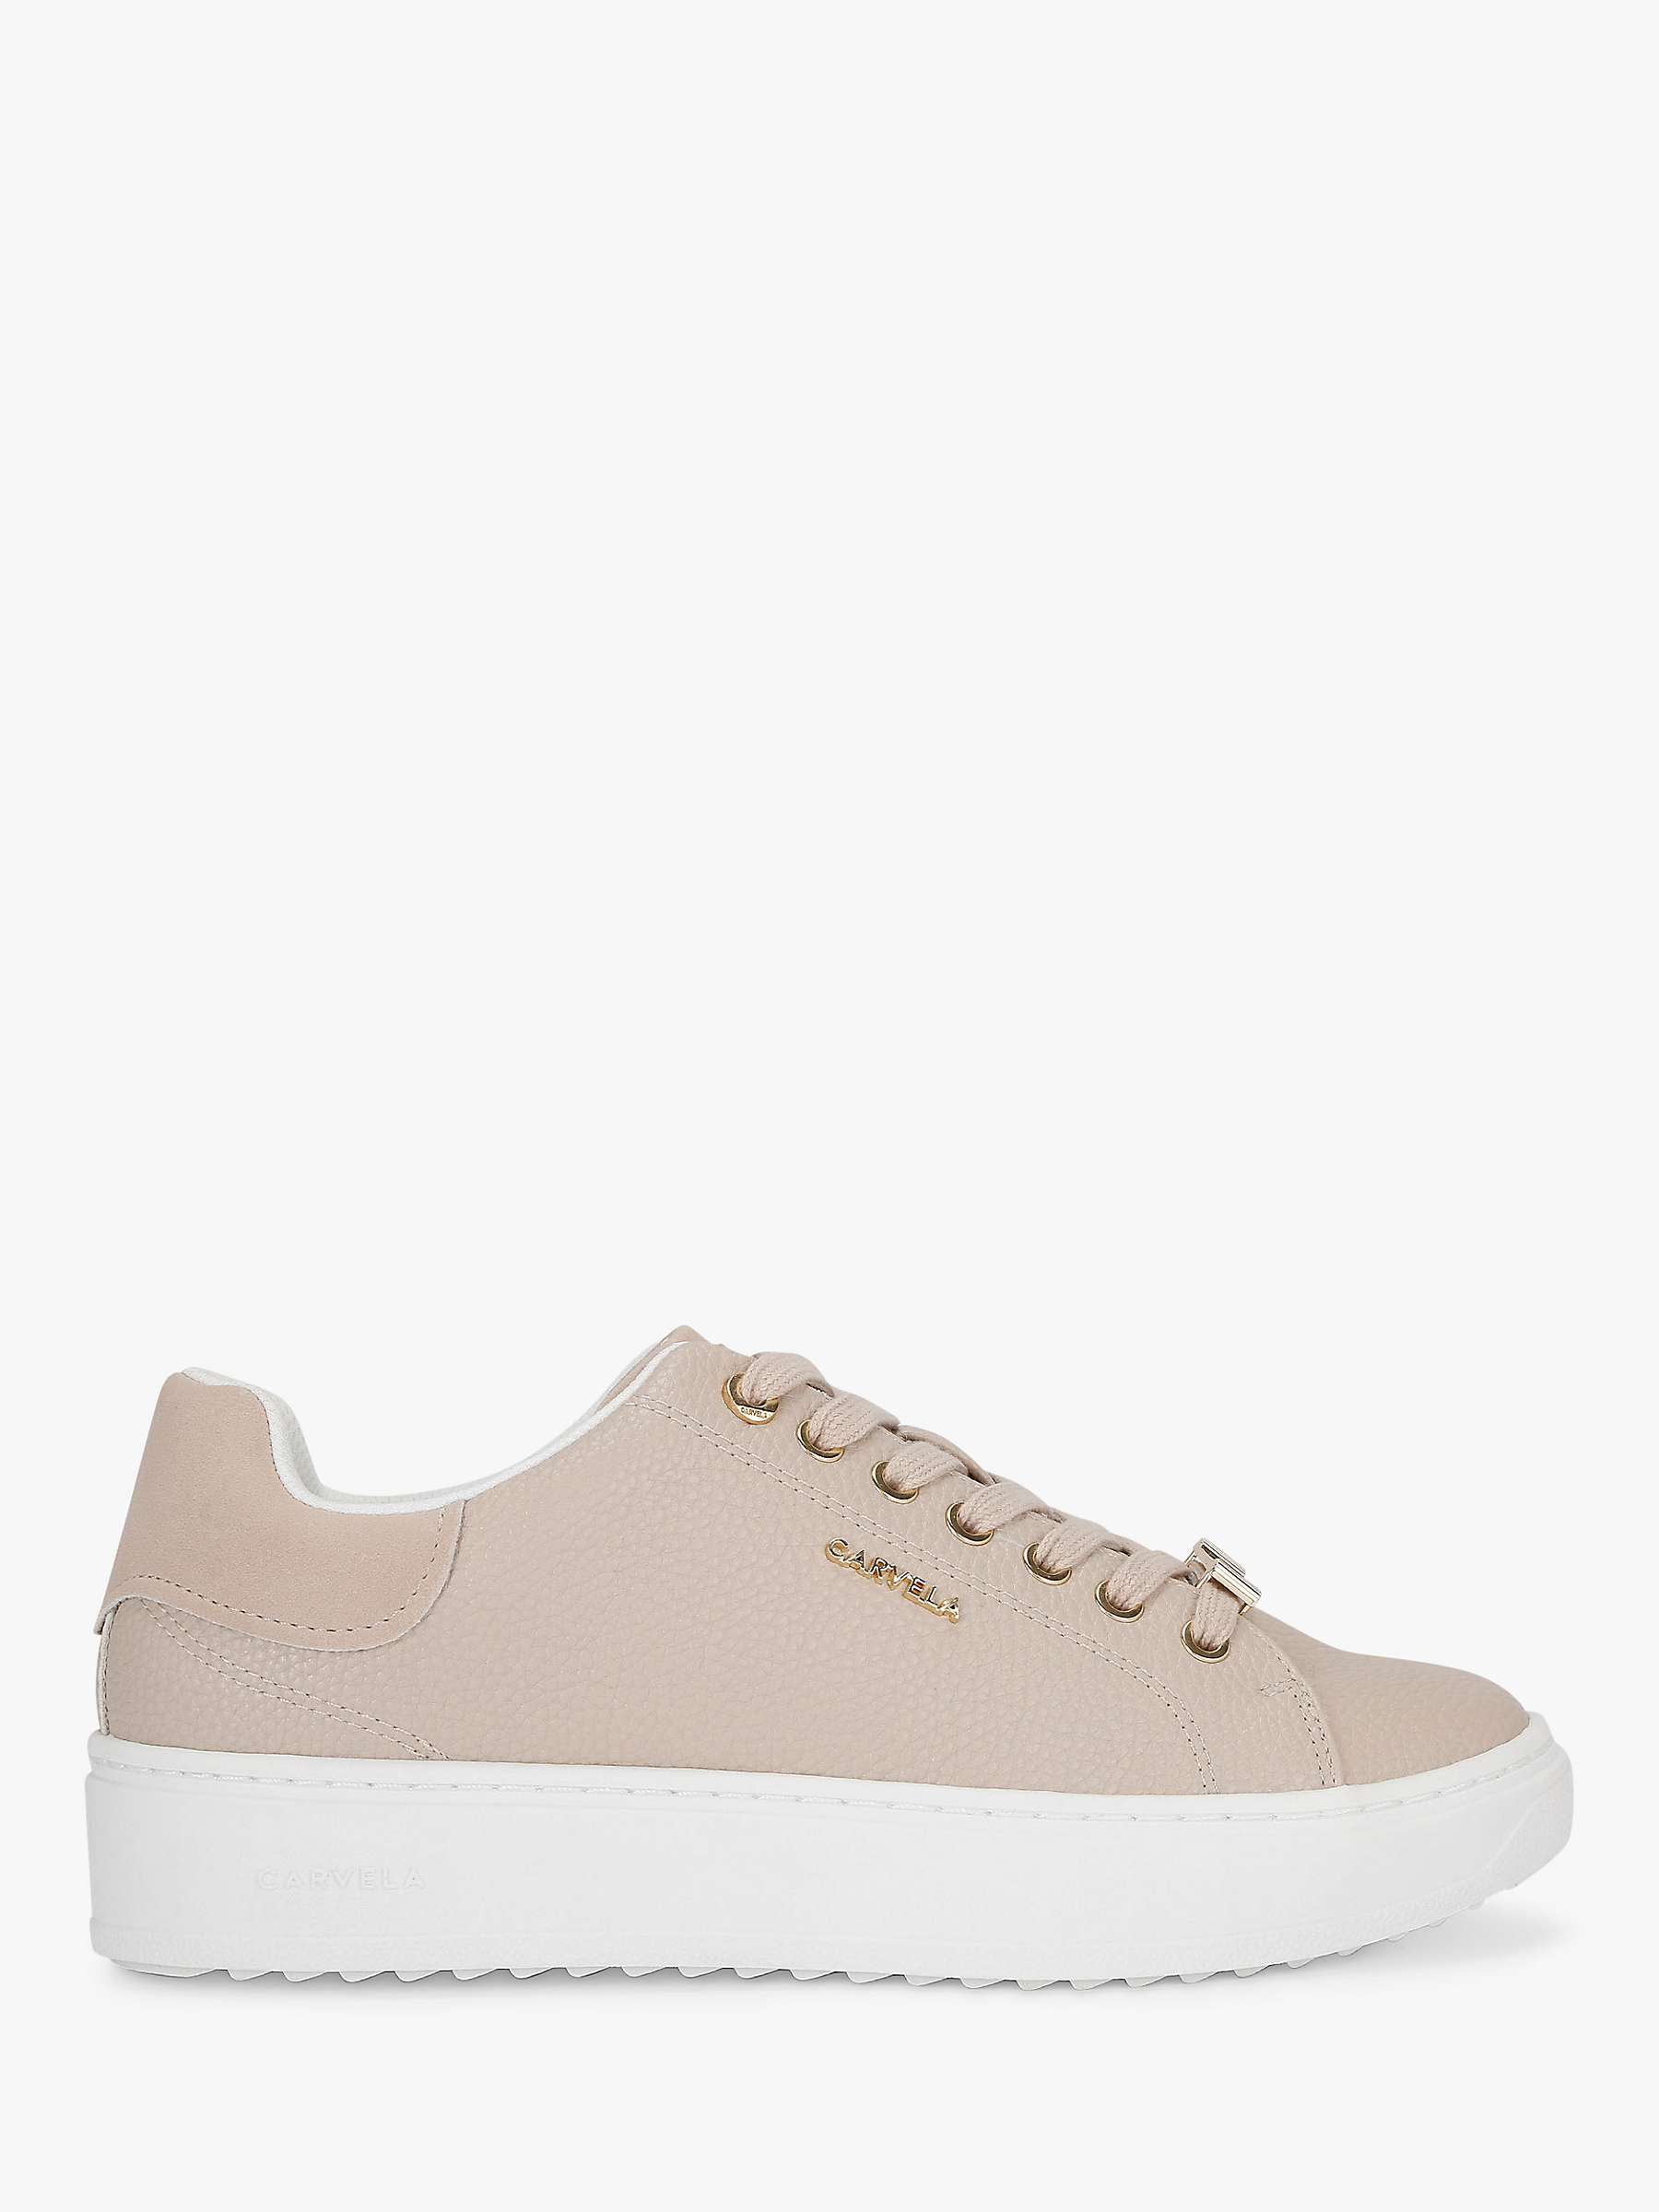 Buy Carvela Dream 2 Trainers, Taupe Online at johnlewis.com